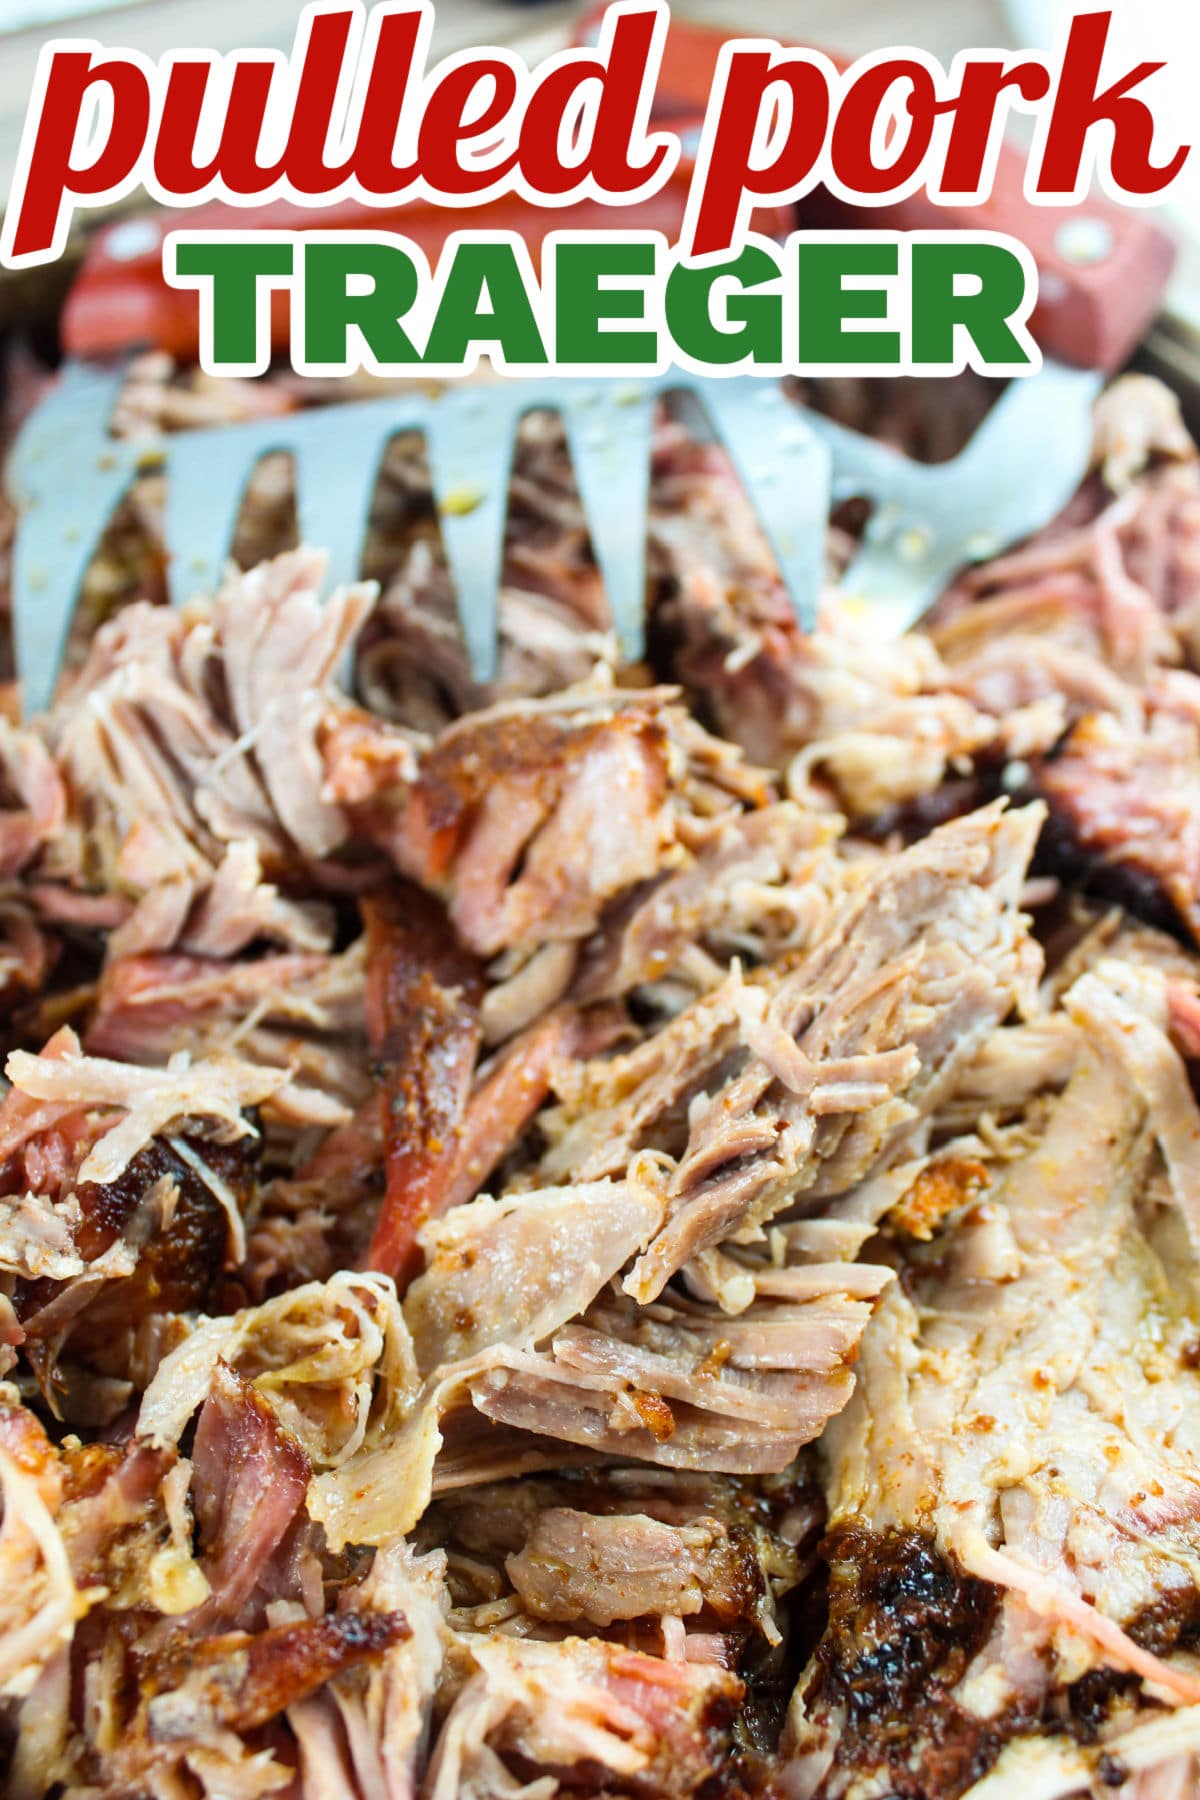 Traeger Pulled Pork is a labor of love but it's worth every minute! You'll come away with a pan of deliciousness! There really isn't much to it - it's just a time consuming endeavor. All good things come to those who wait and this is one of them! It's tender, juicy and so delicious! So grab the buns, the coleslaw and the baked beans - your best pulled pork is here!!! via @foodhussy